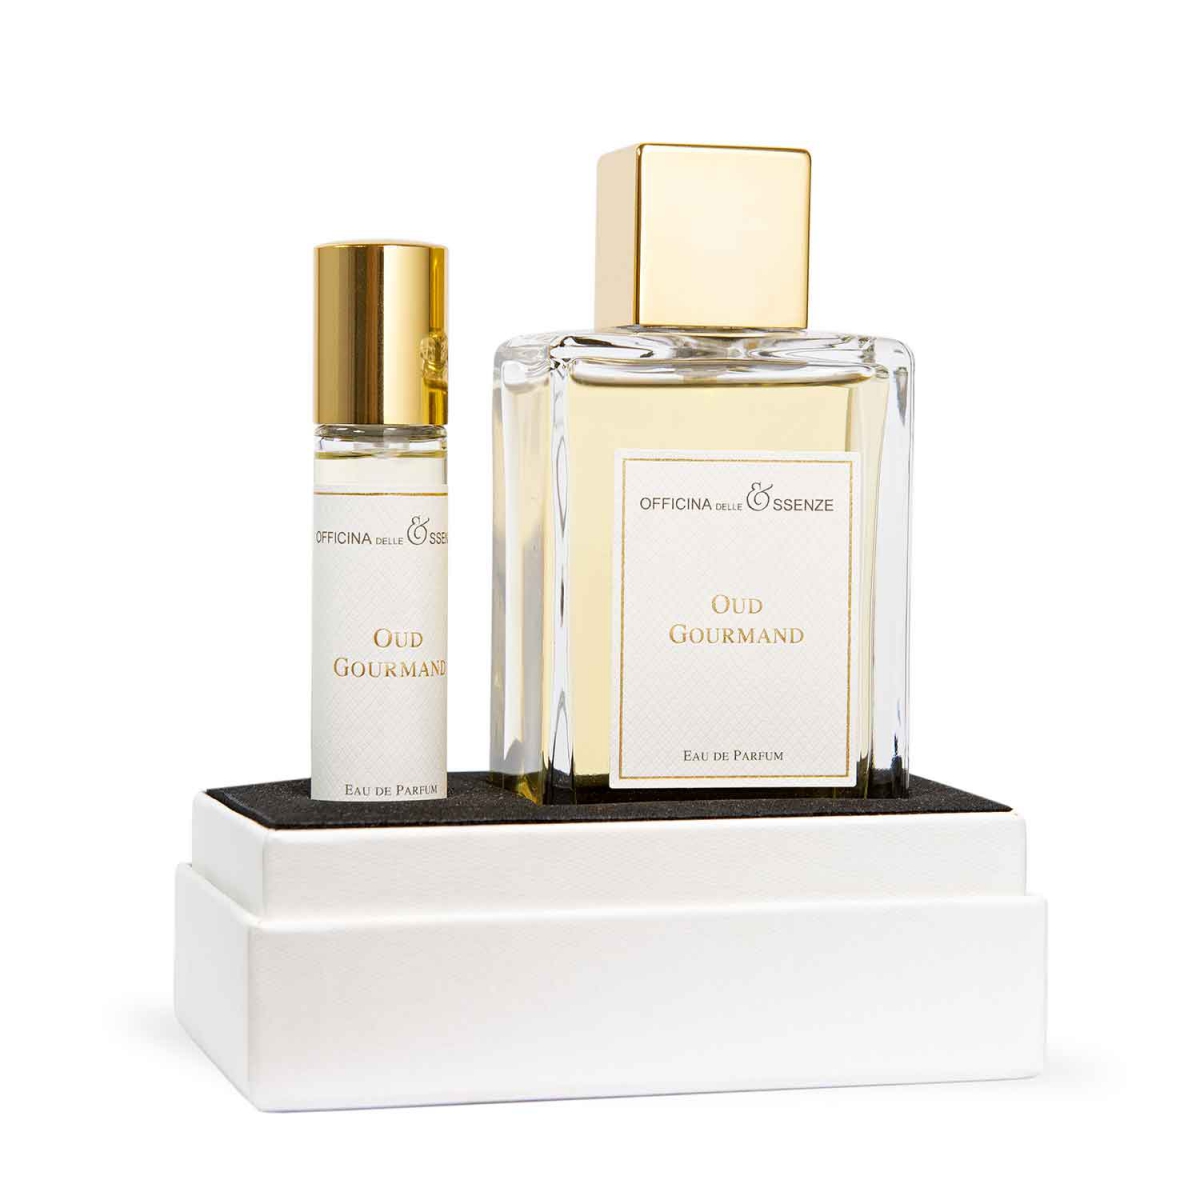 Oud scent by Officina delle Essenze